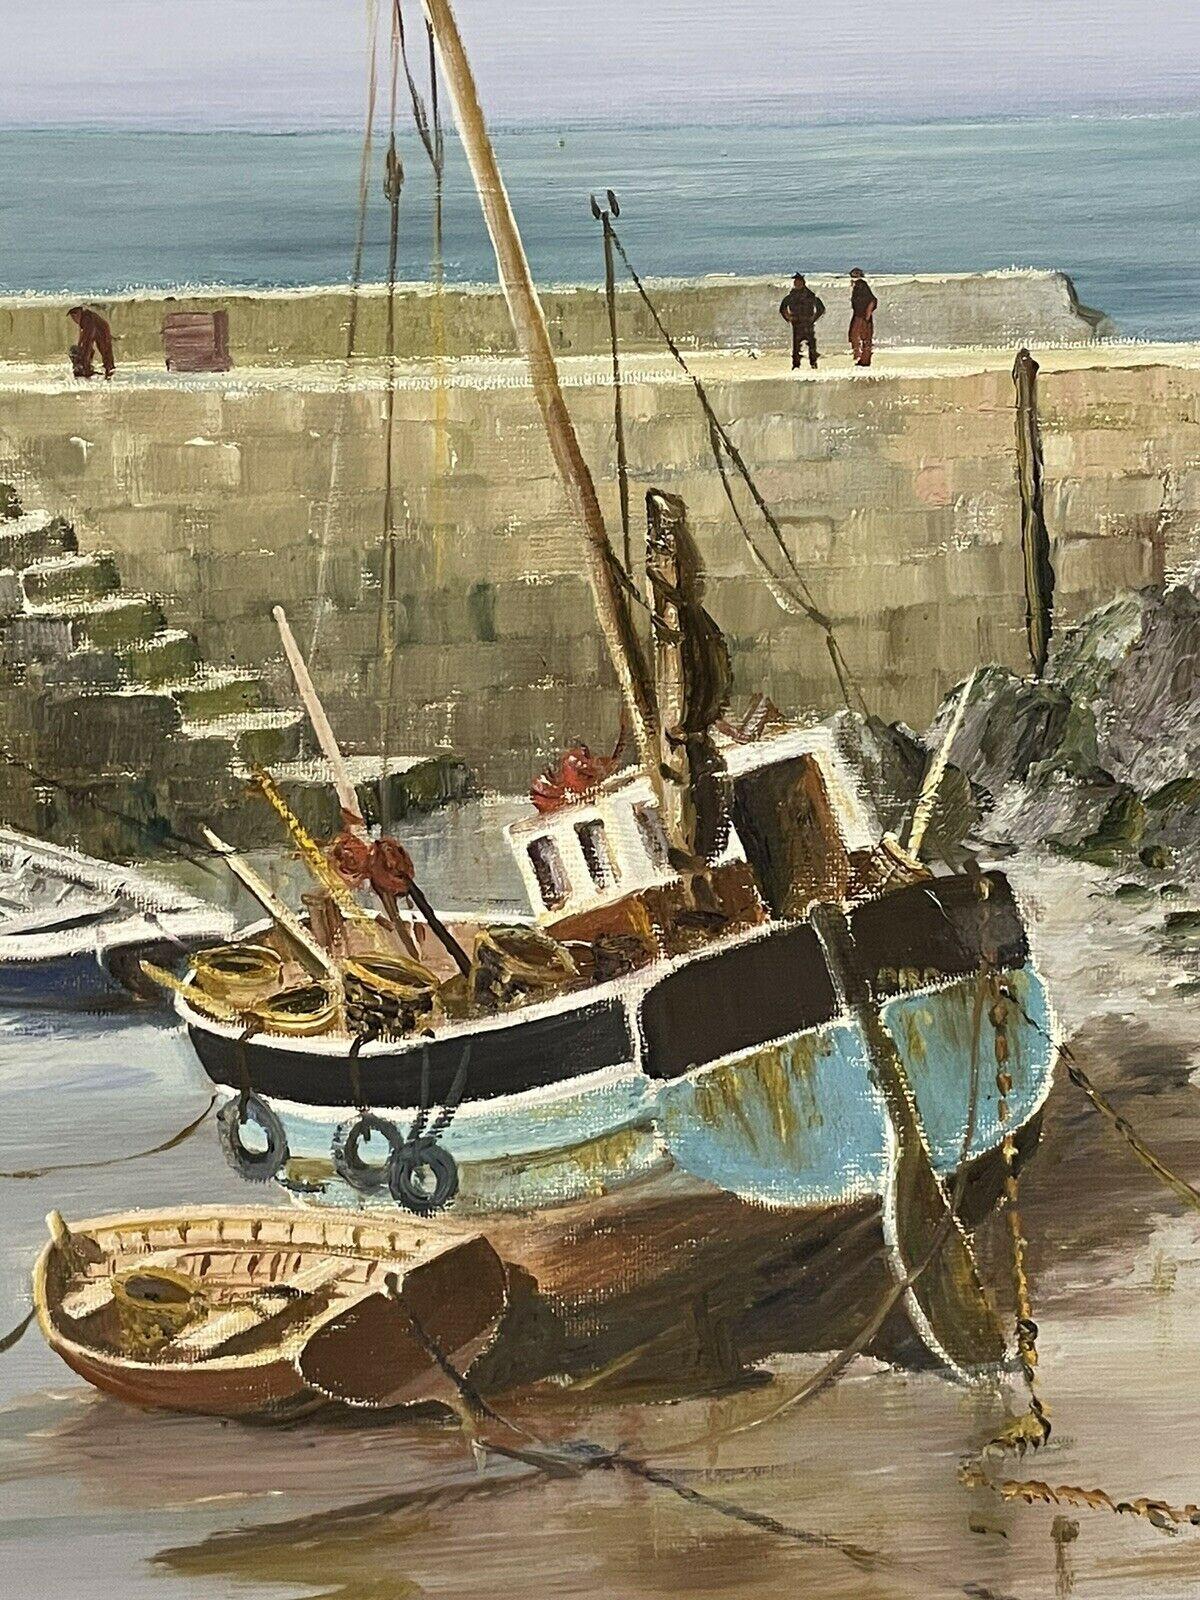 VINTAGE CORNISH FISHING HARBOR SCENE - SIGNED OIL PAINTING - Impressionist Painting by Lester Atack